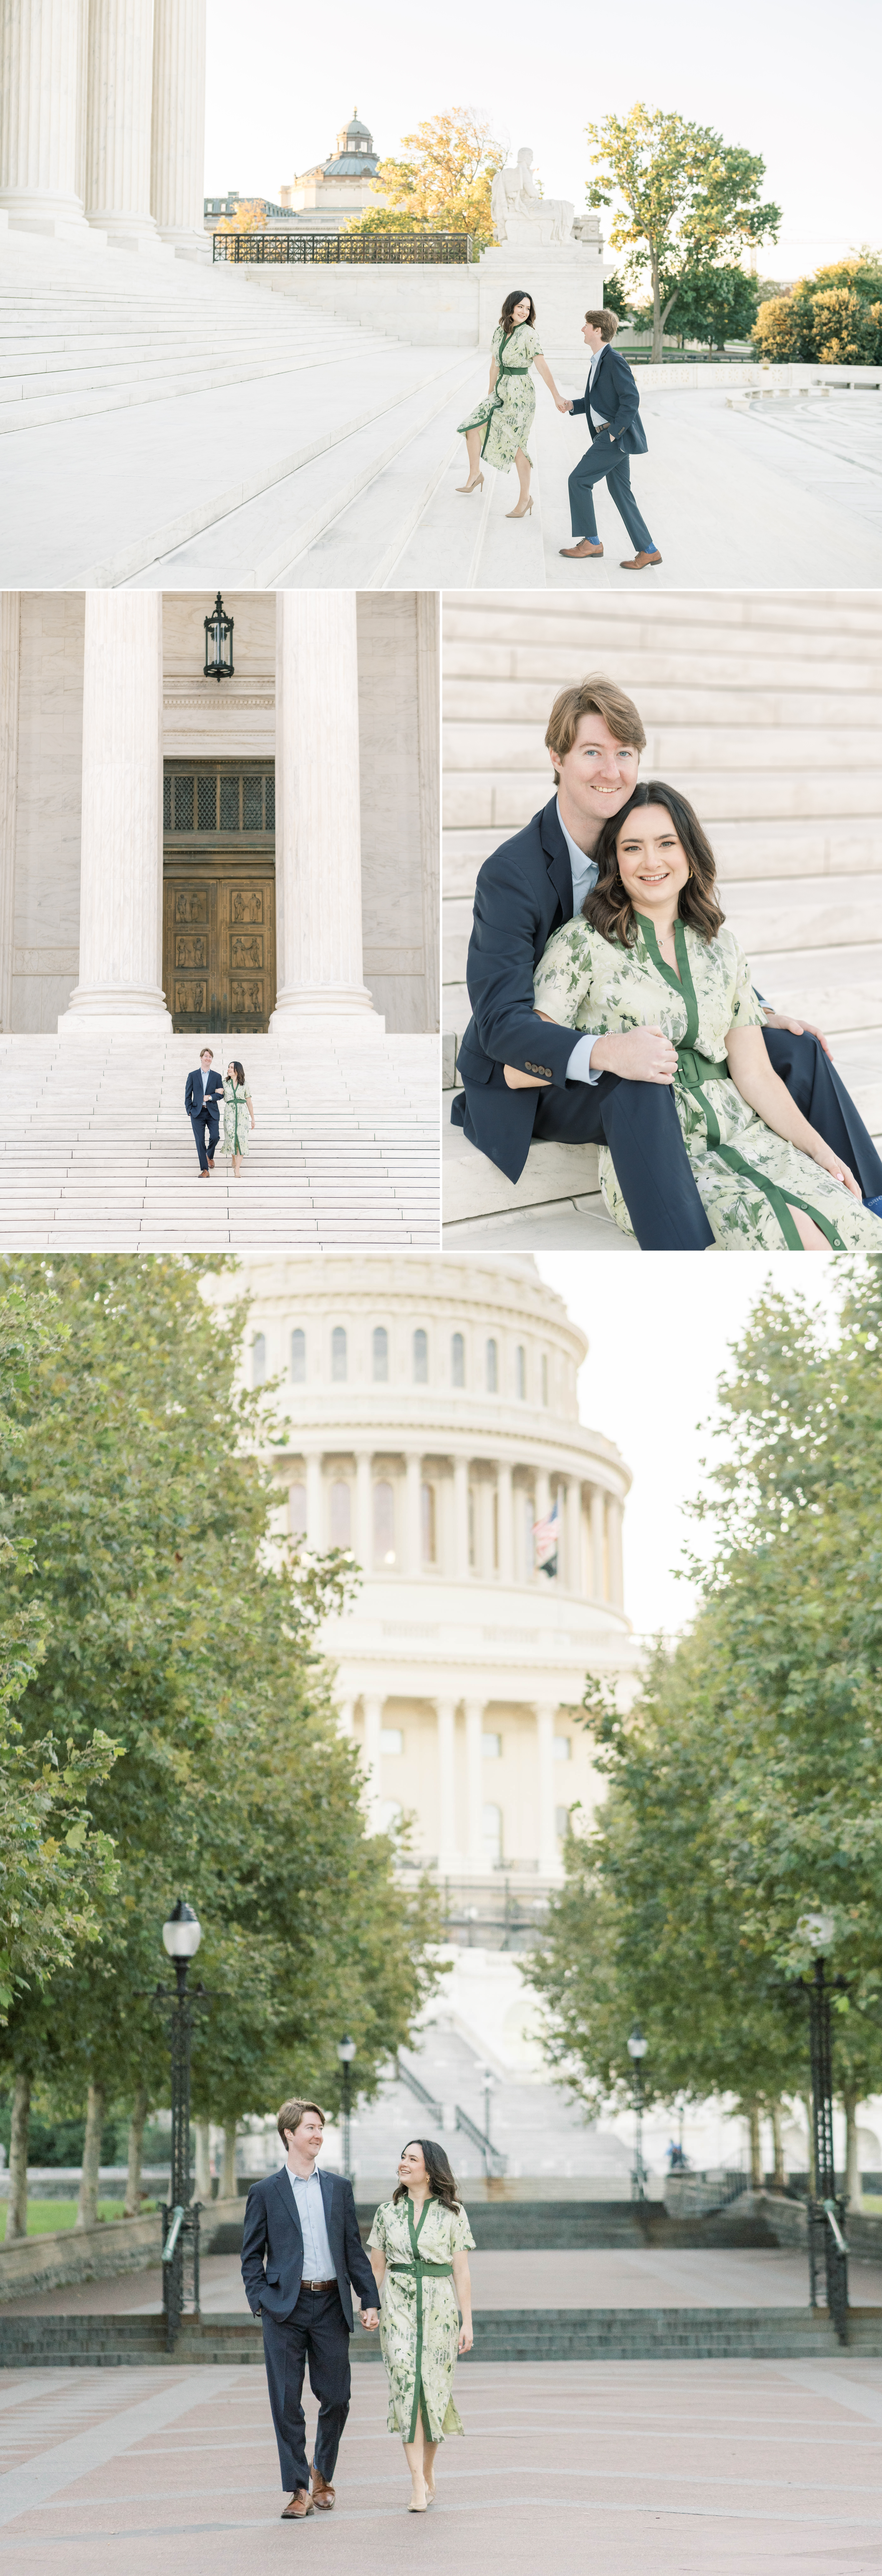 A classic engagement session at the US Capitol & Supreme Court in Washington, DC.